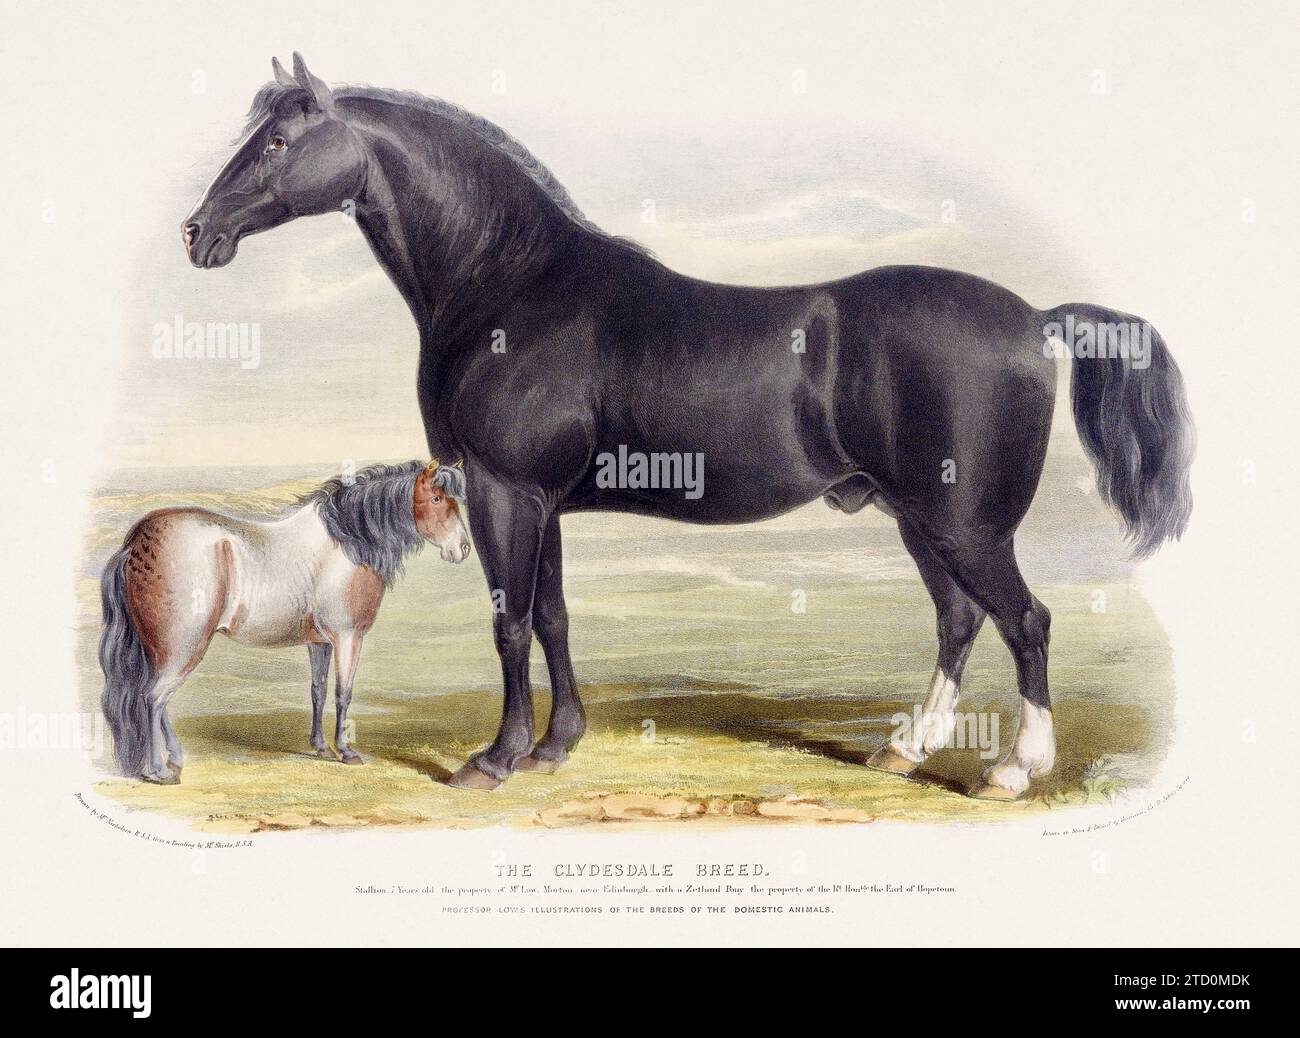 Vintage Horse illustration from a mid-19th-century book on domestic animal breeds. Stock Photo